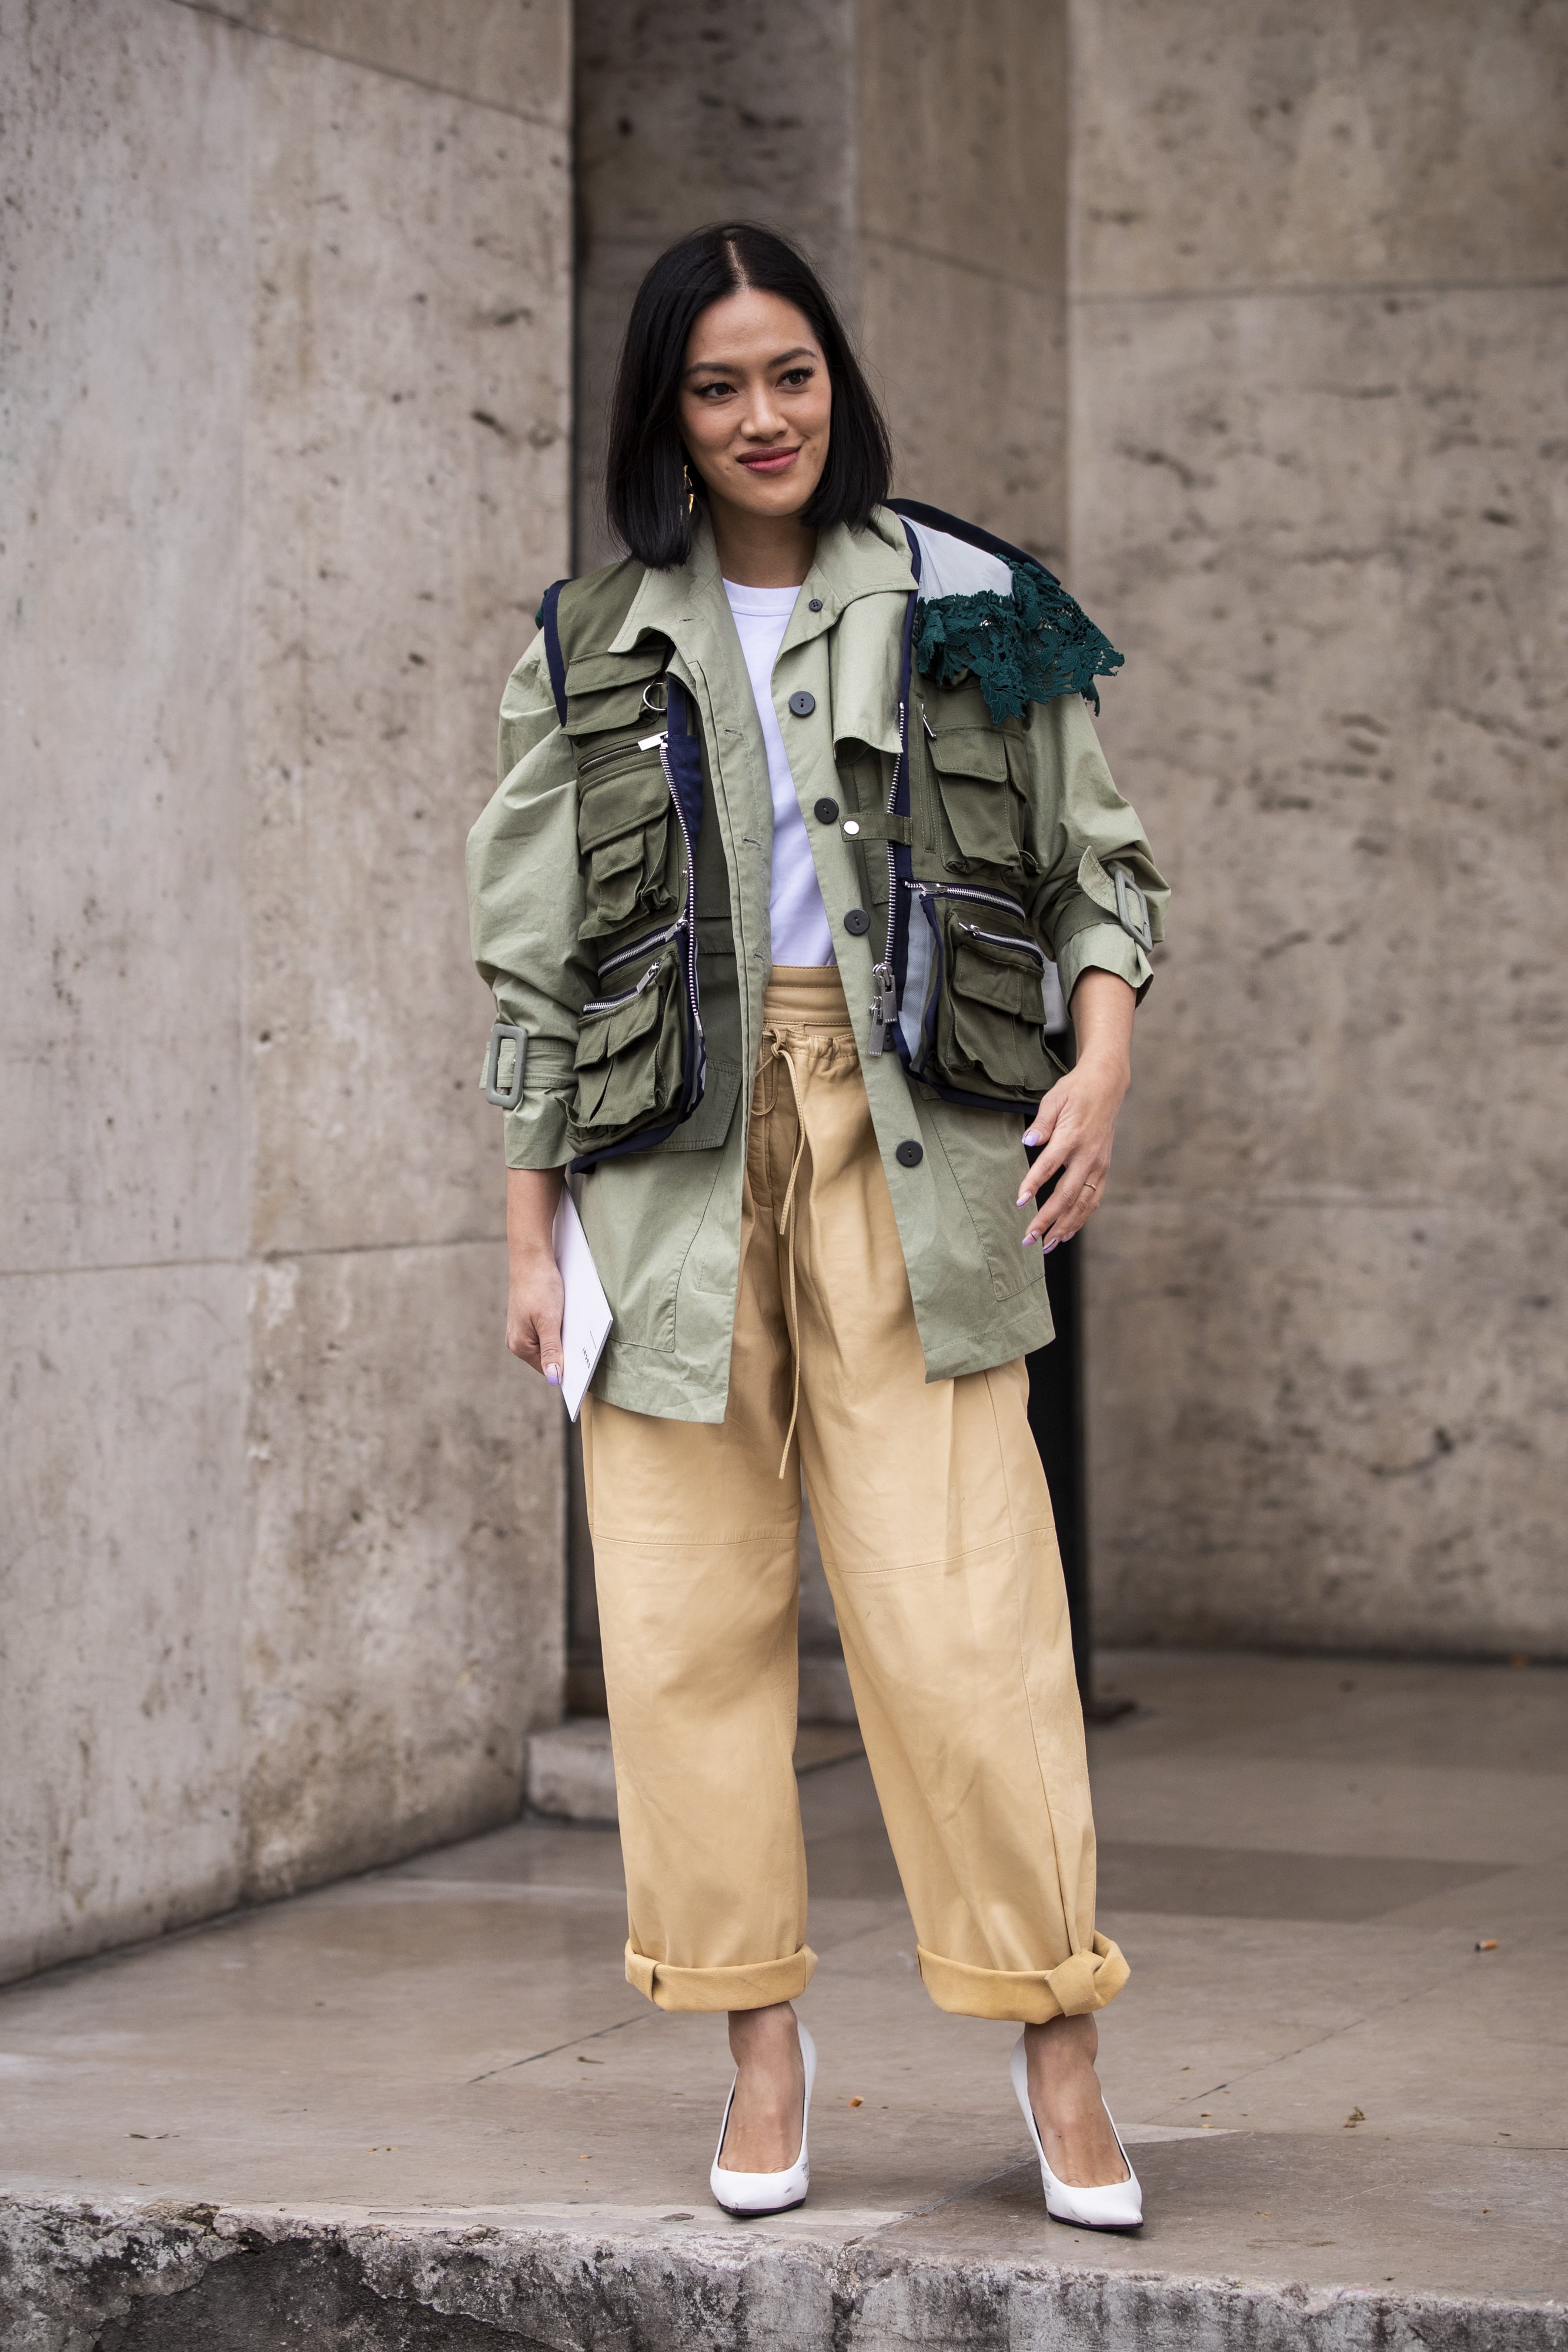 For a casually luxe look, tuck a leather shirt into cargo pants